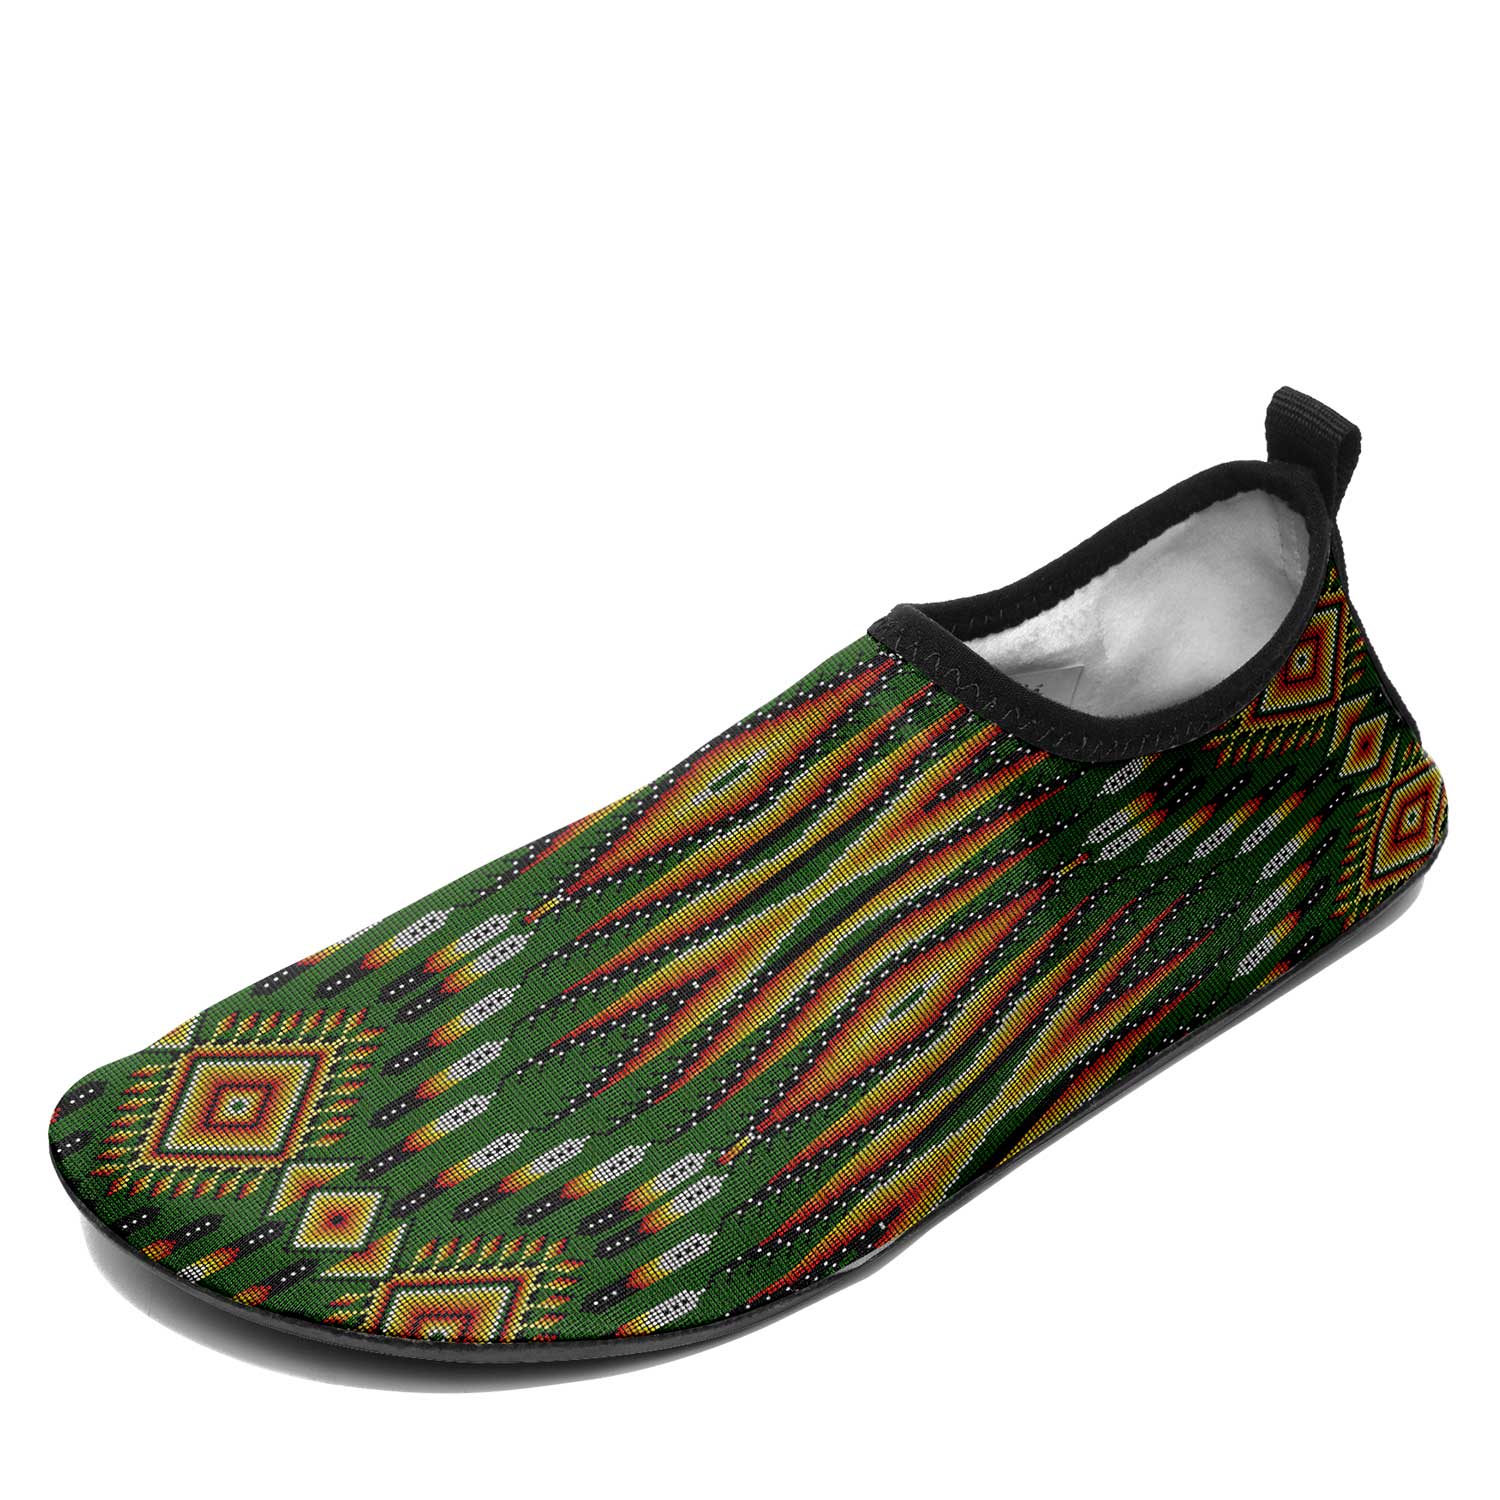 Fire Feather Green Kid's Sockamoccs Slip On Shoes